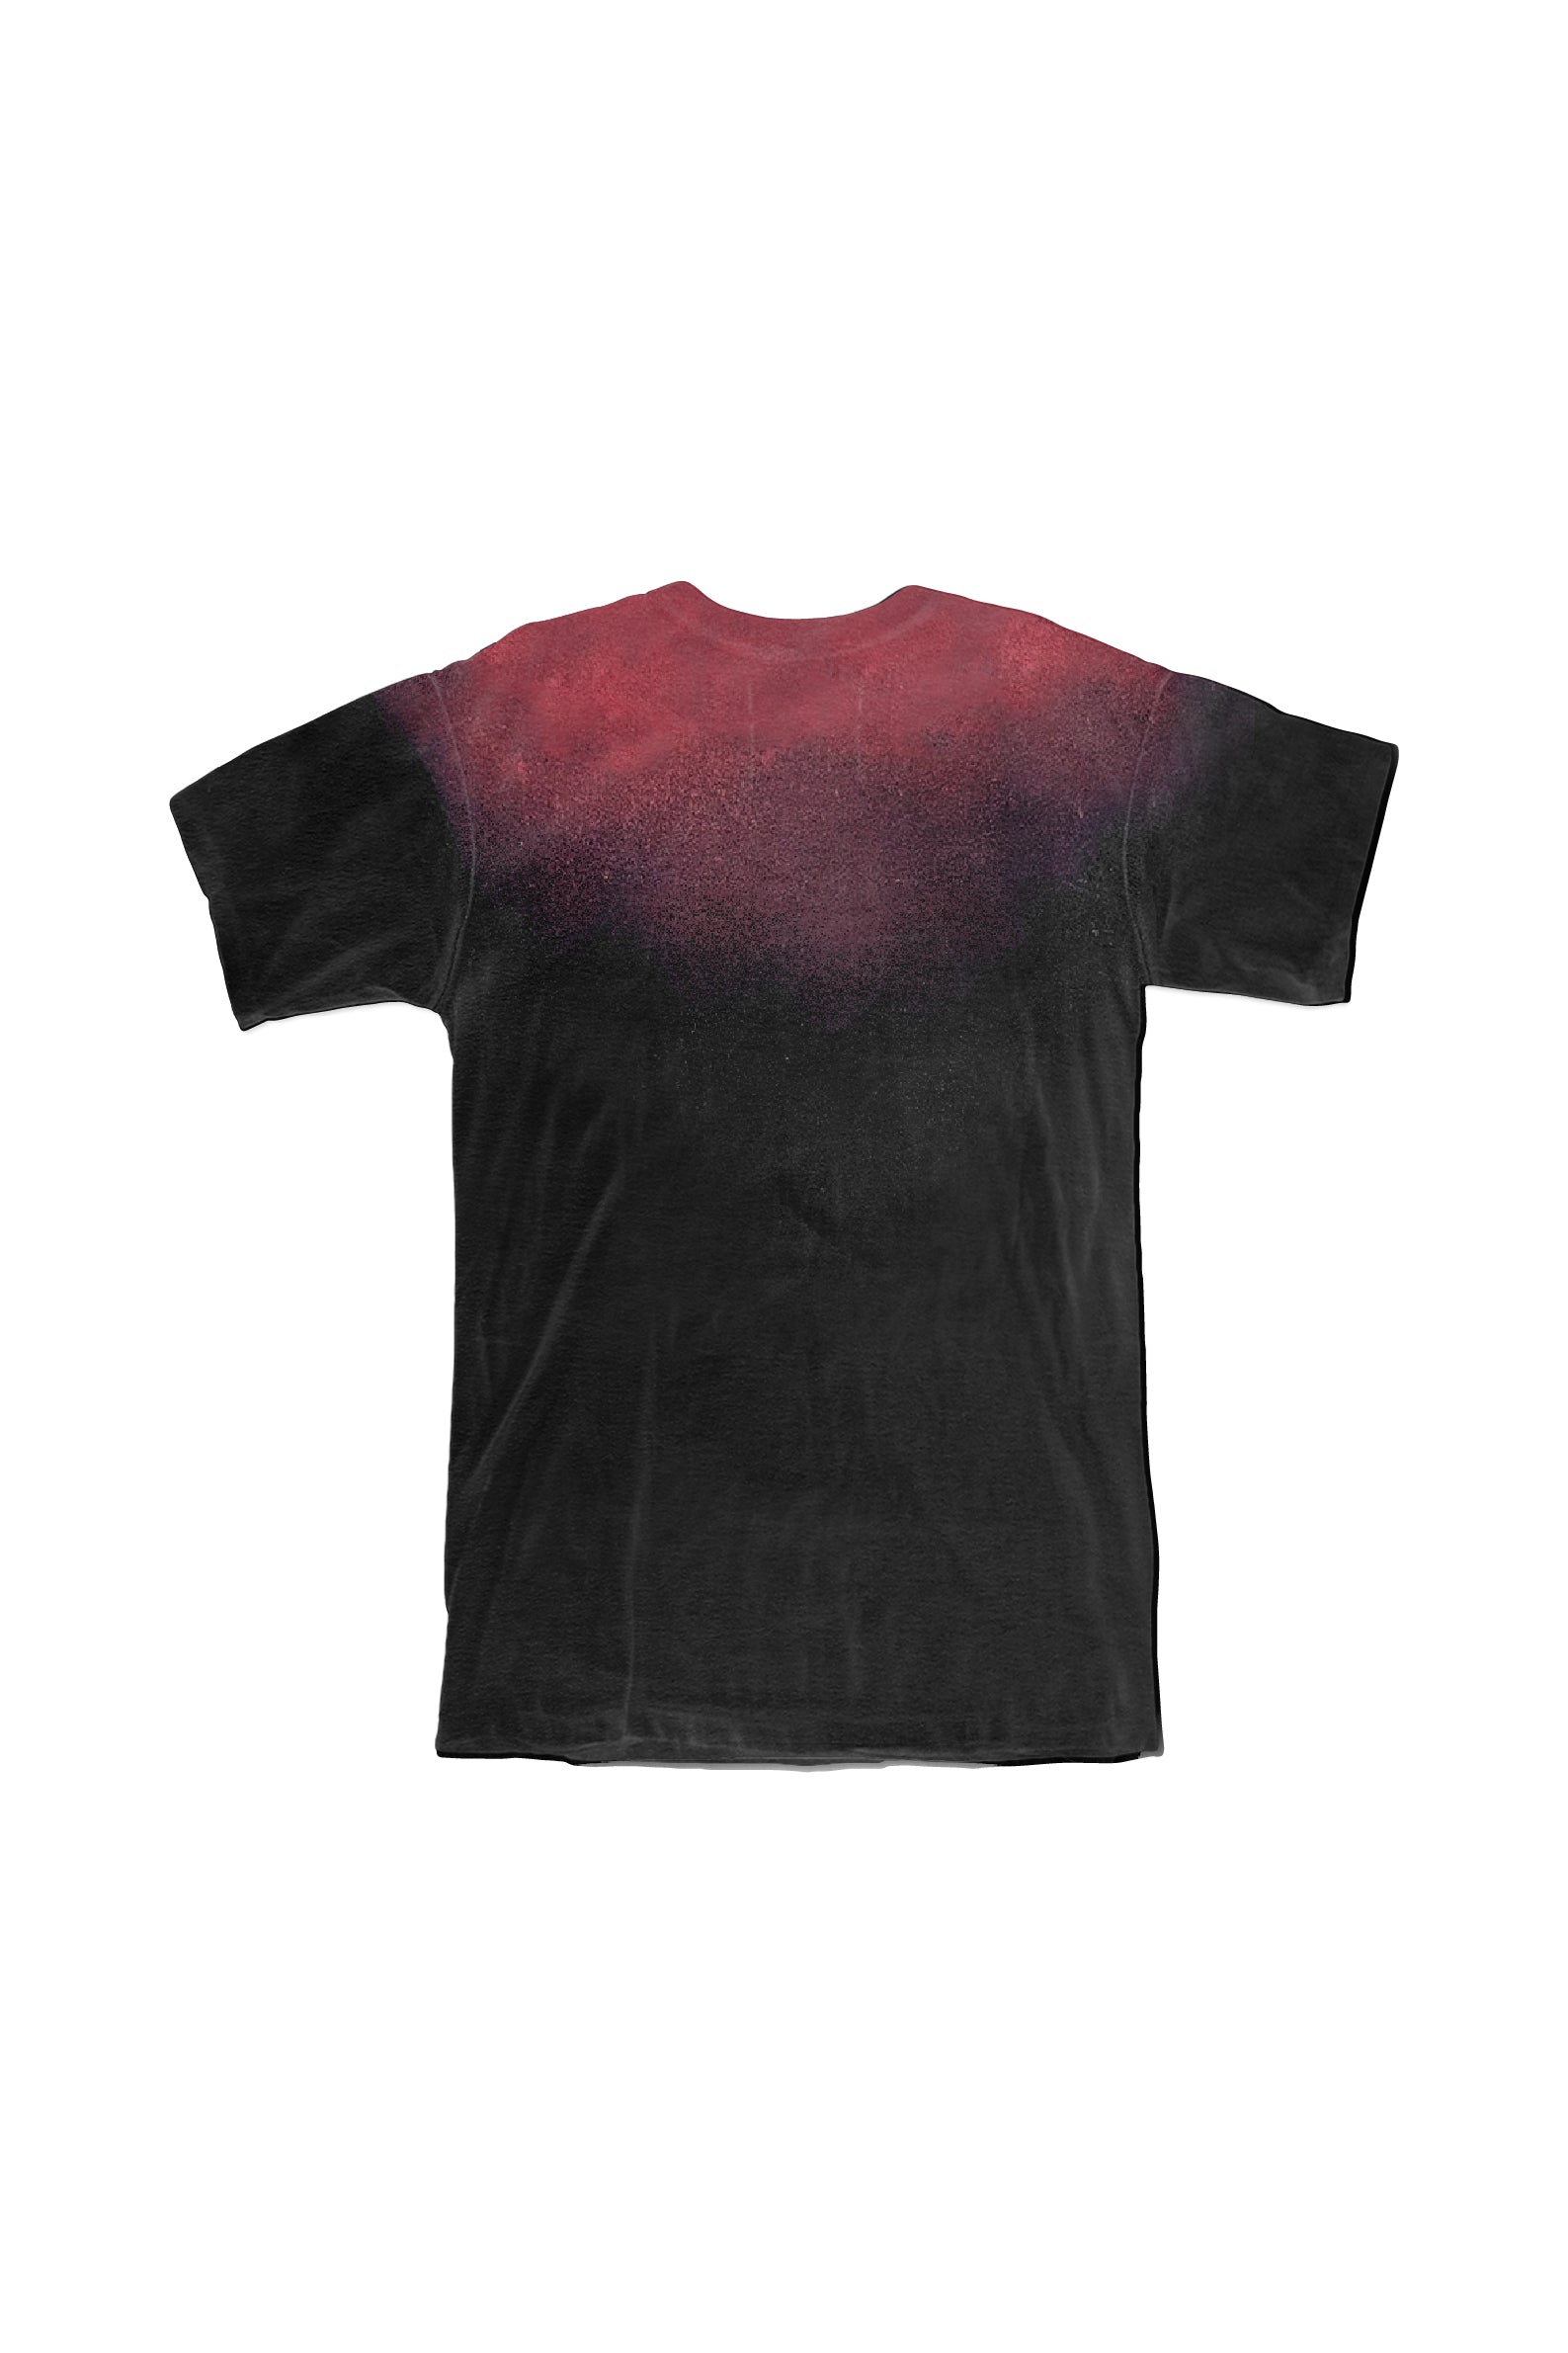 Inside Out Tee - Black